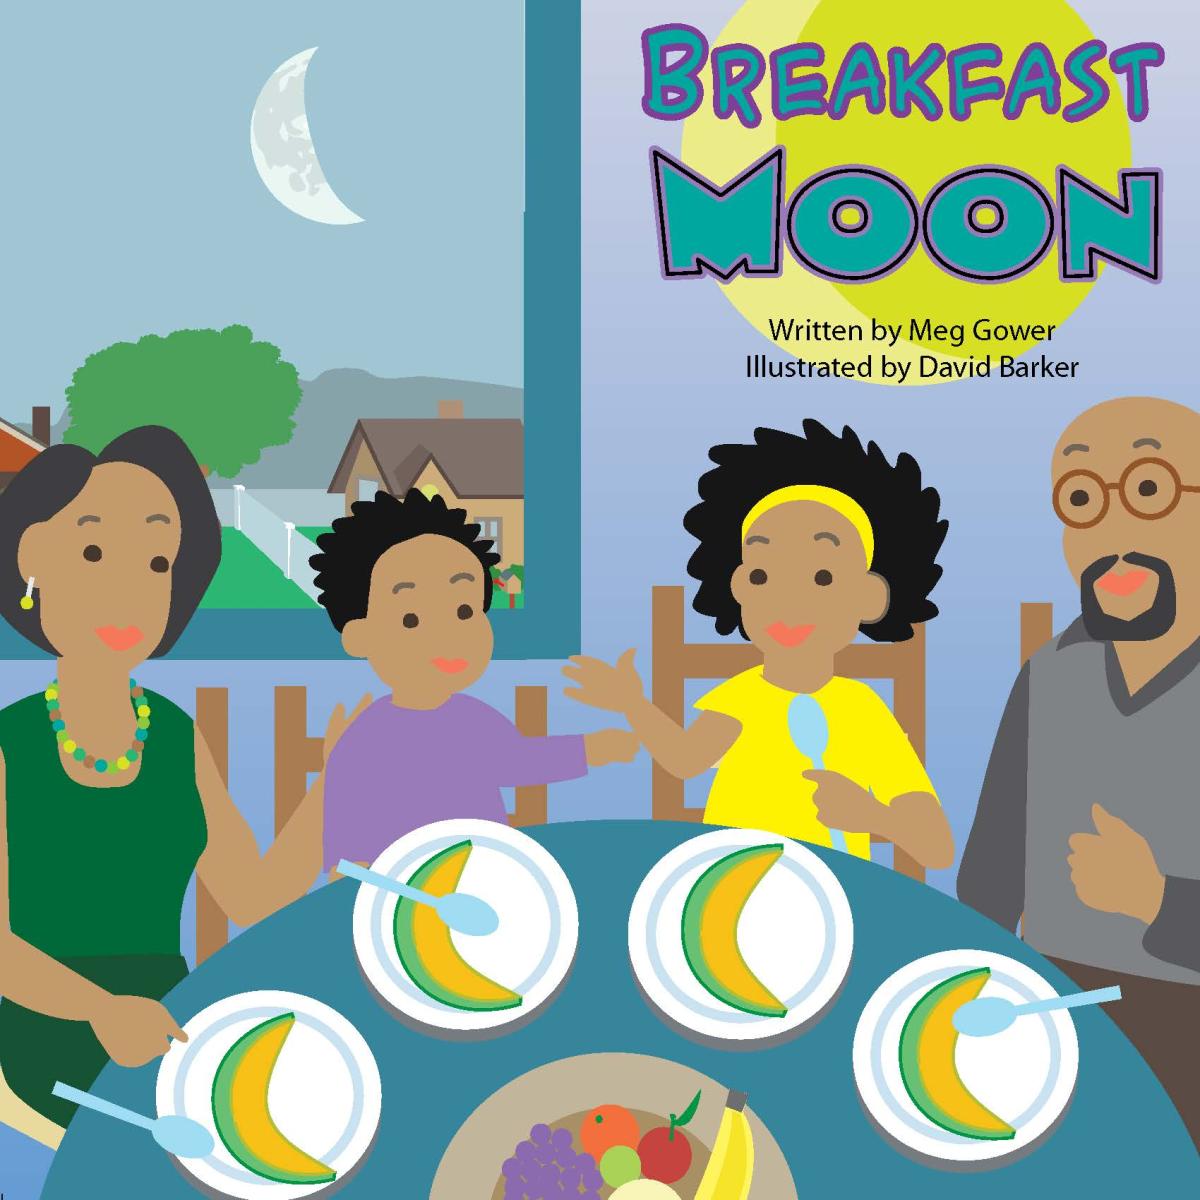 Book cover from the Break Moon Book featuring an illustration of of a family at a dinner table eating fruit